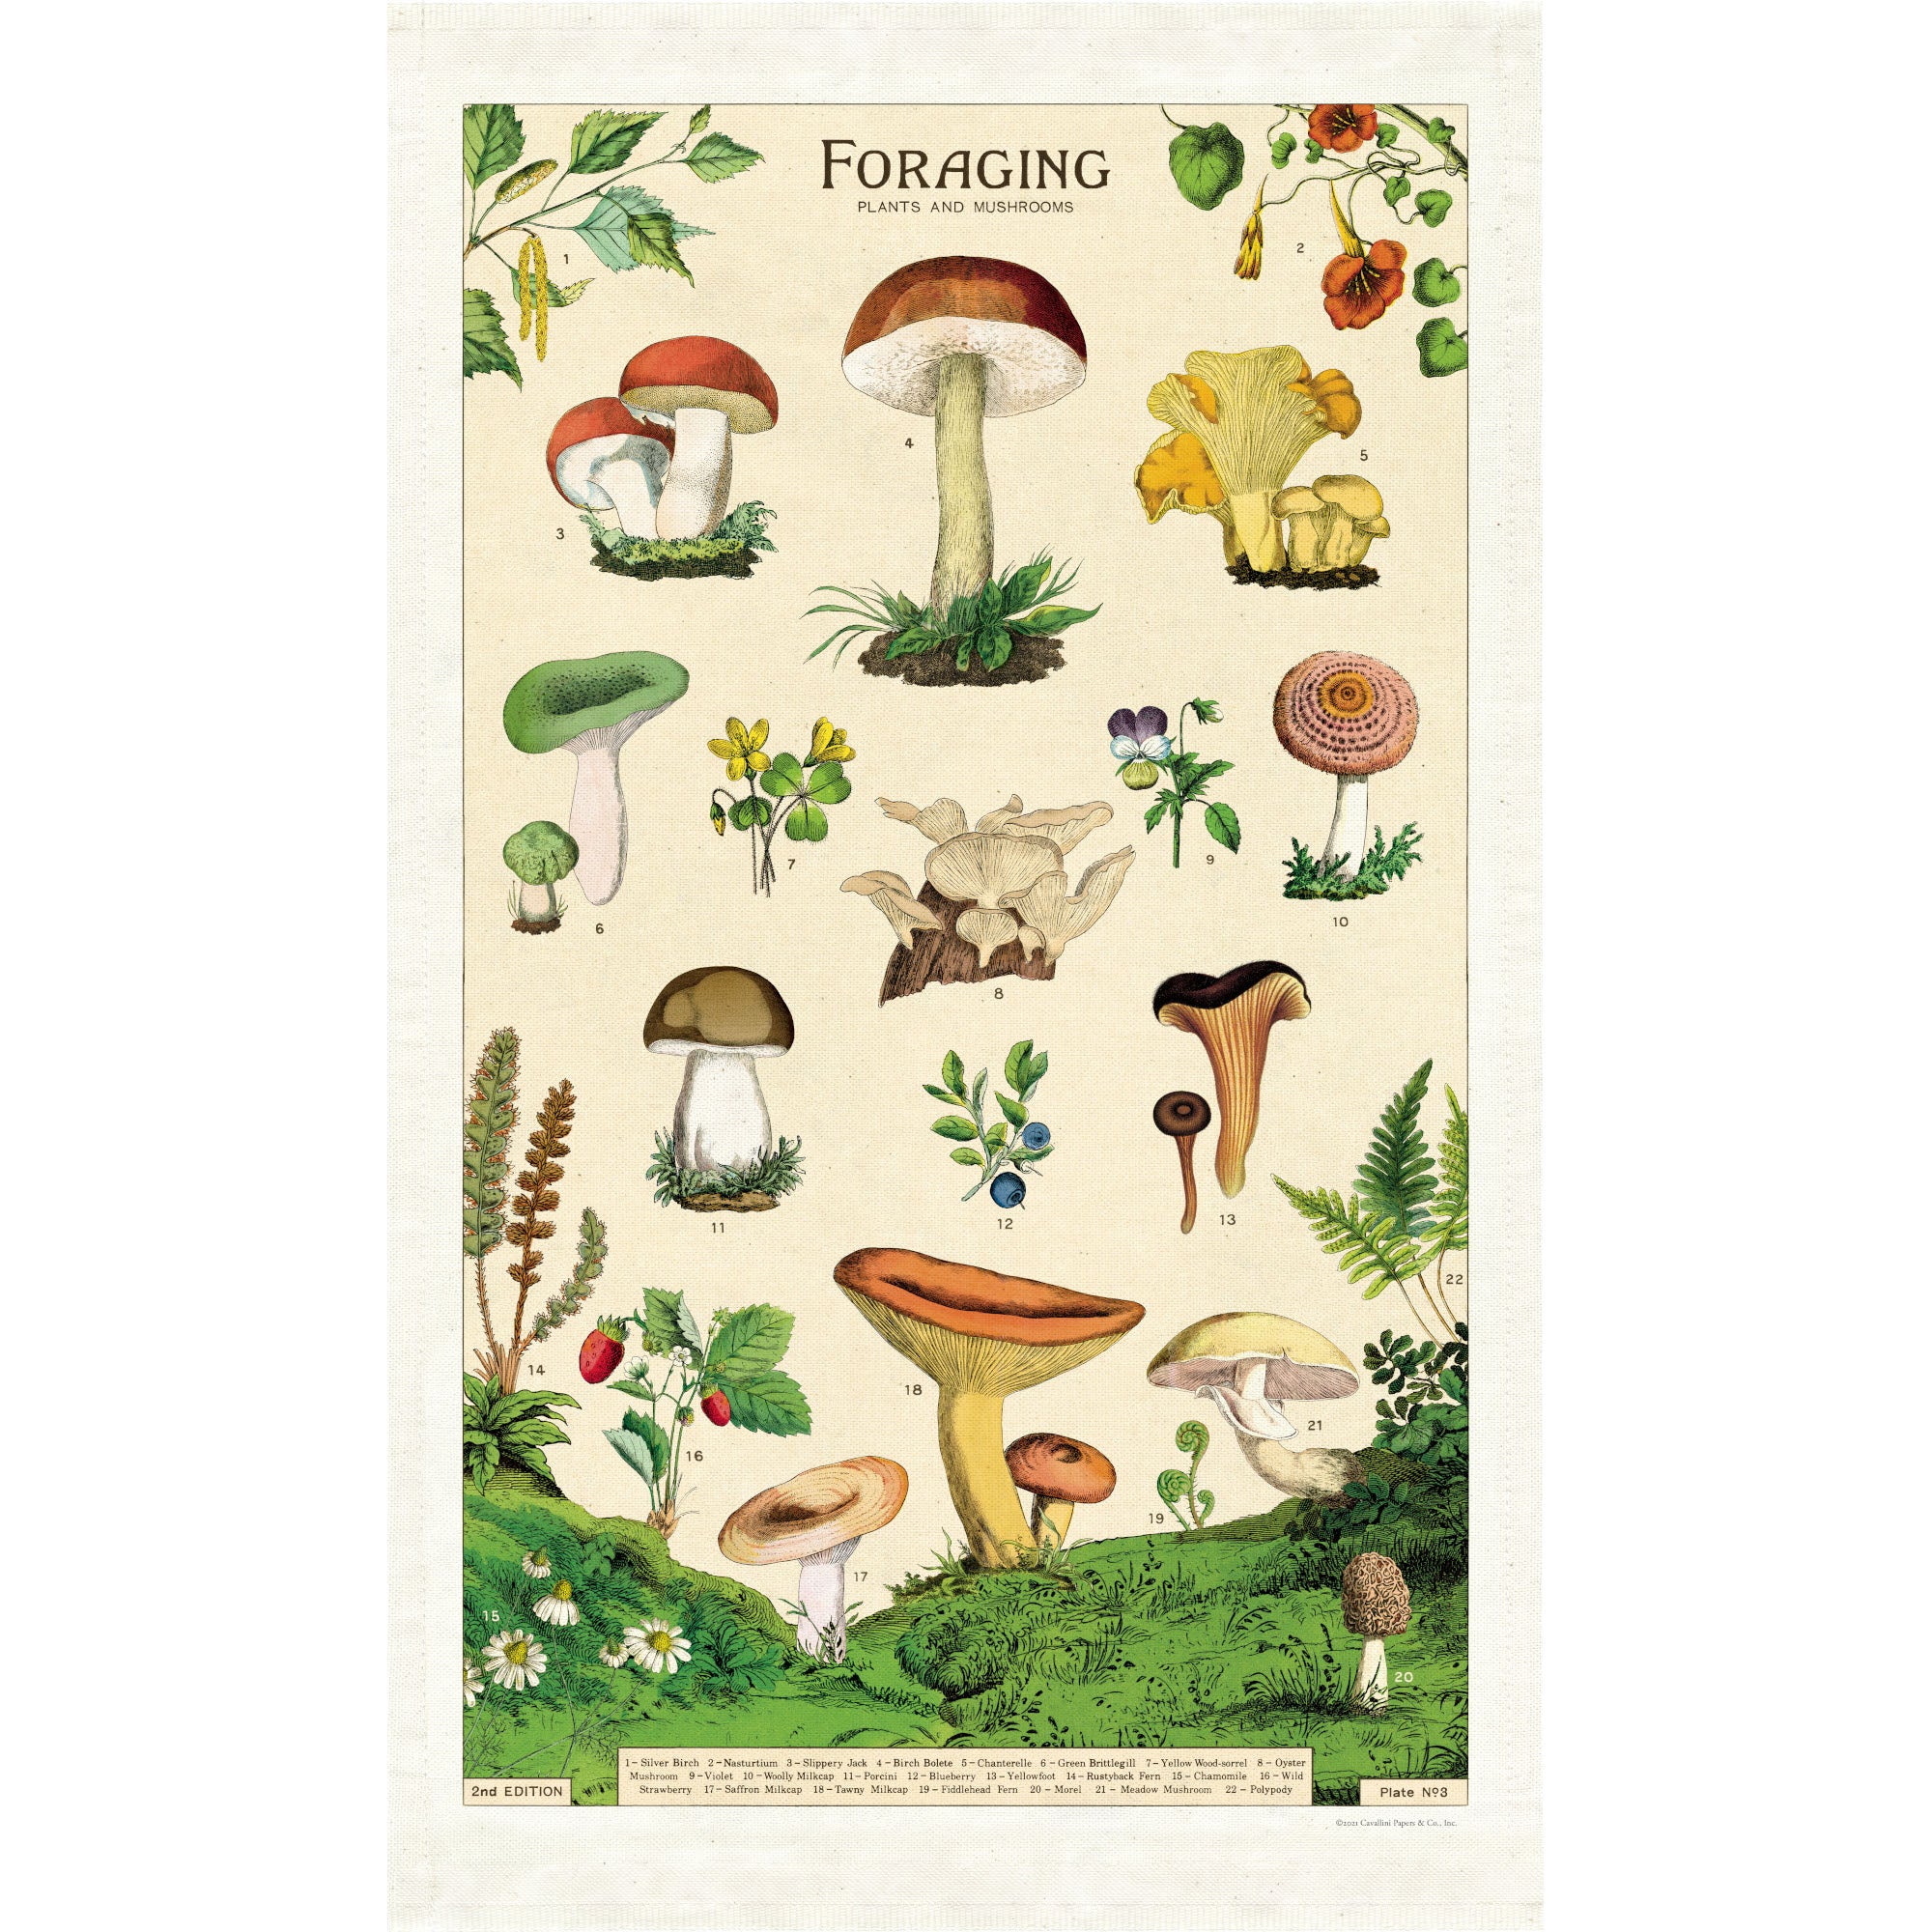 Illustrated guide to foraging with various plants and mushrooms, printed on a natural cotton Foraging Tea Towel by Cavallini Papers &amp; Co.